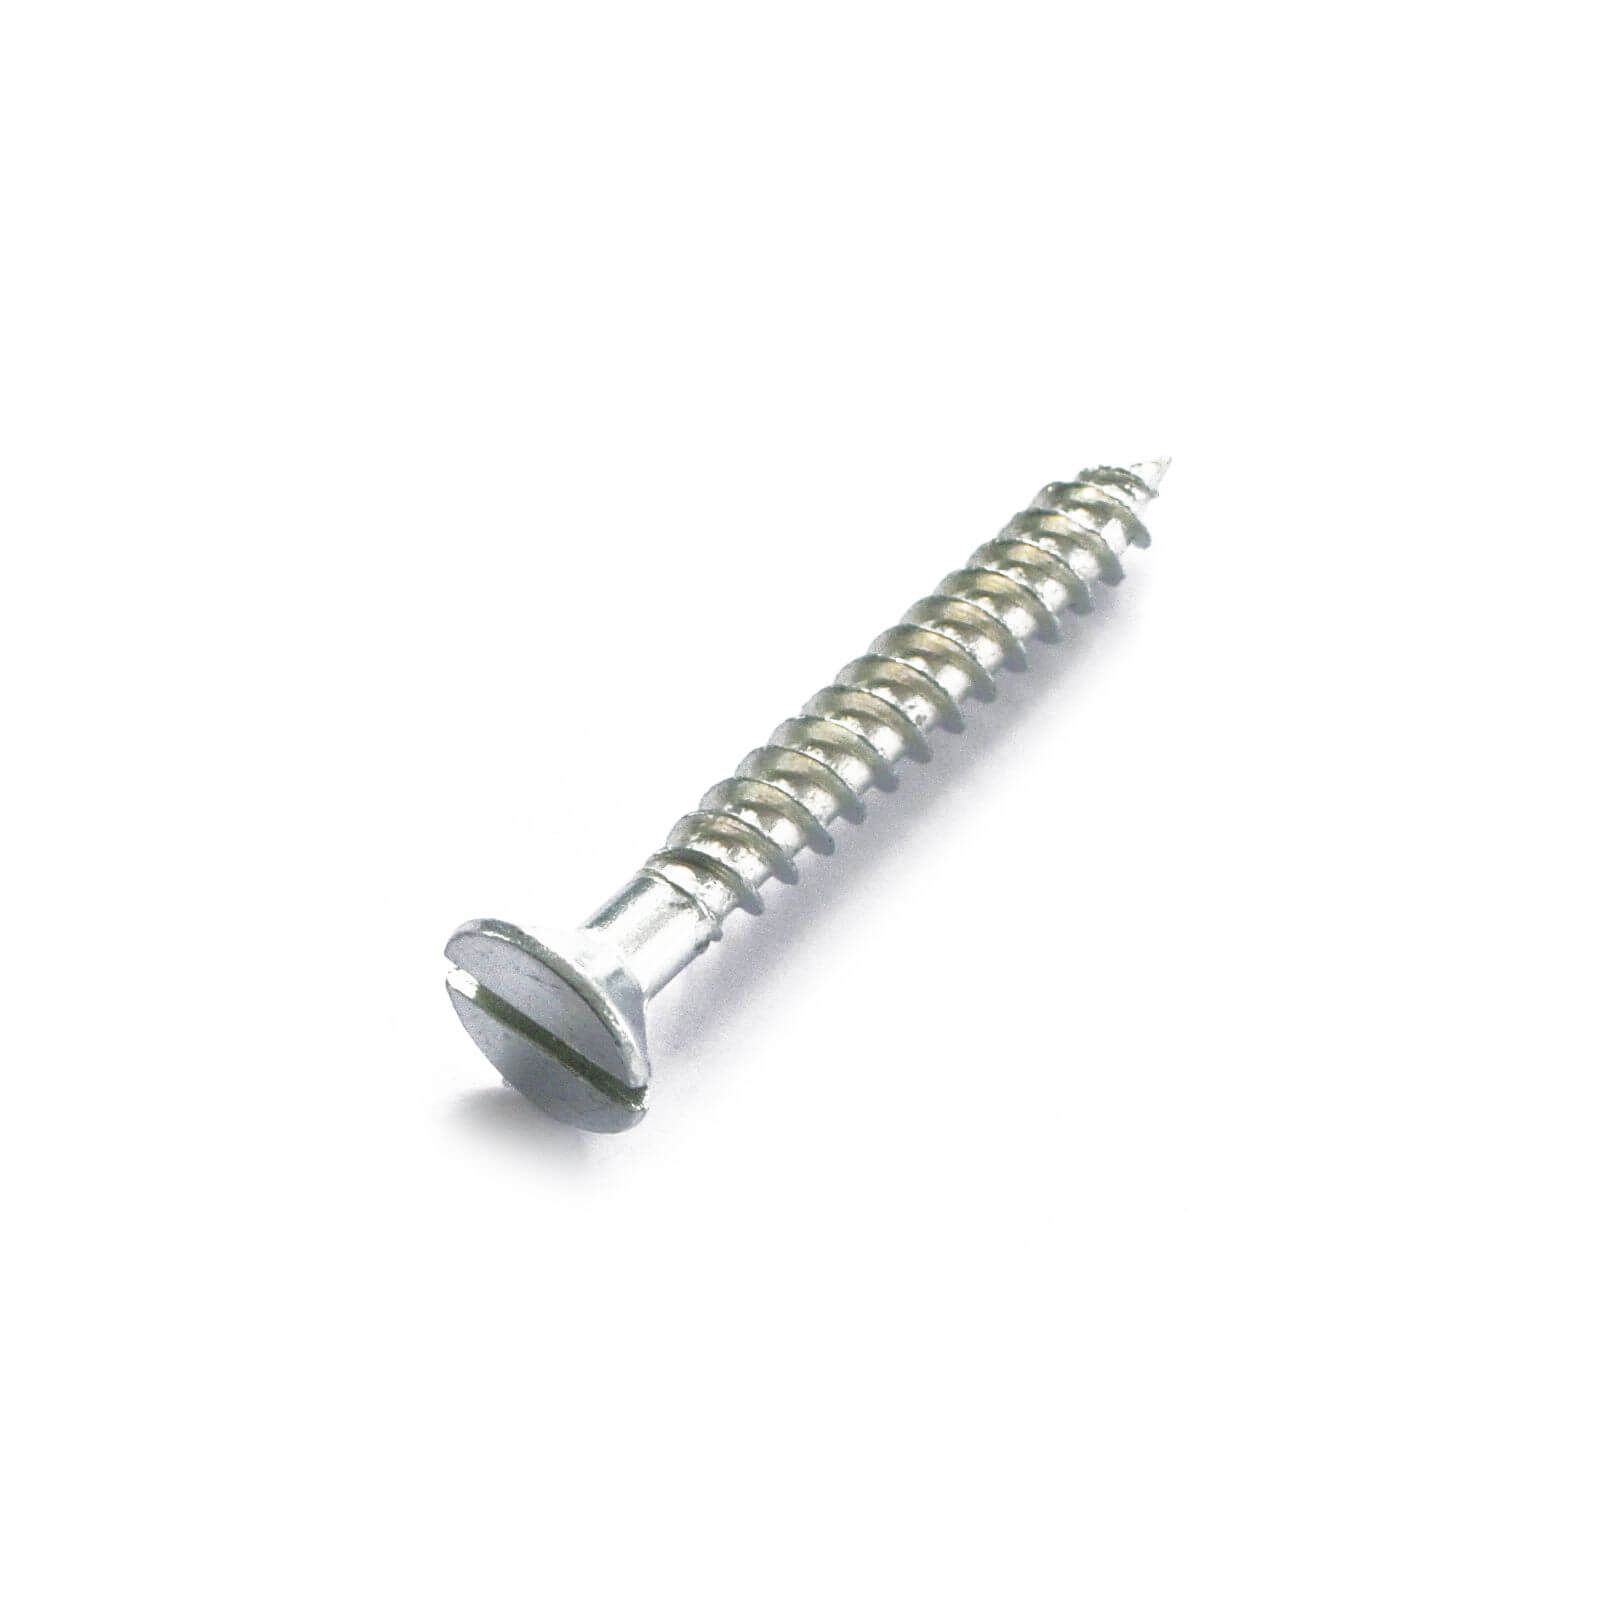 Wood Screw - Countersunk - Bright Zinc Plated - 6 x 75mm - 10 Pack